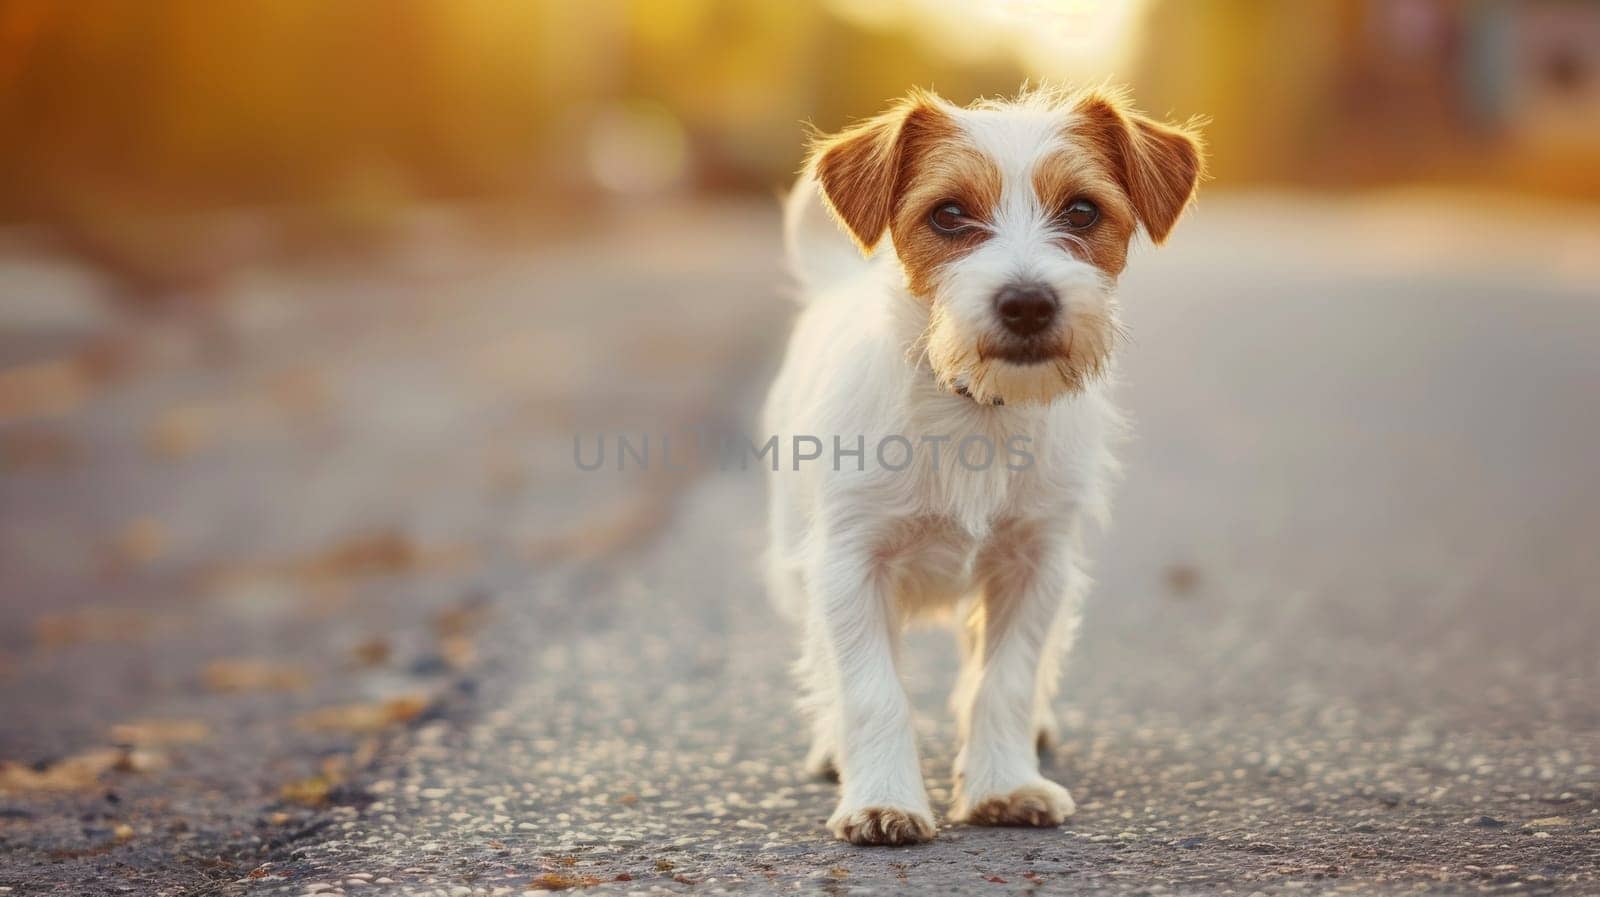 A small dog walking on a road with sunlight shining down